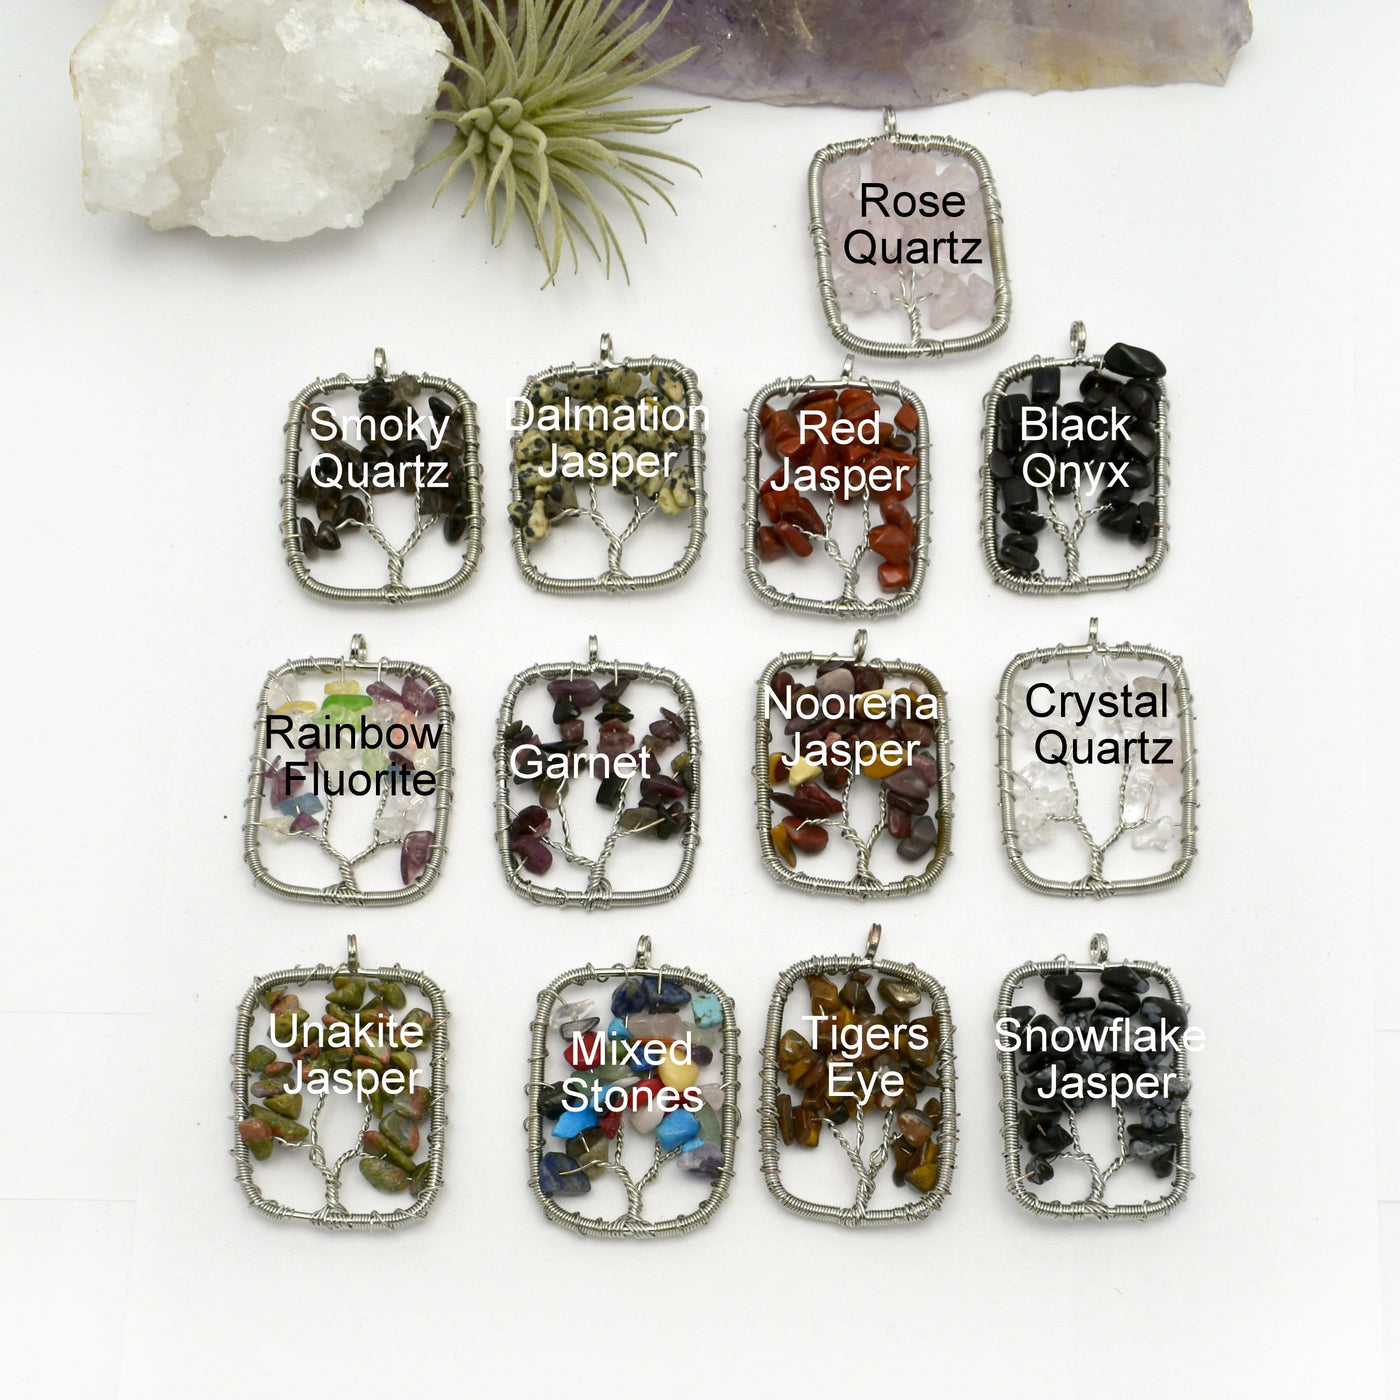 13 tree of life pendants labeled with respective crystal variation on white background with decorations